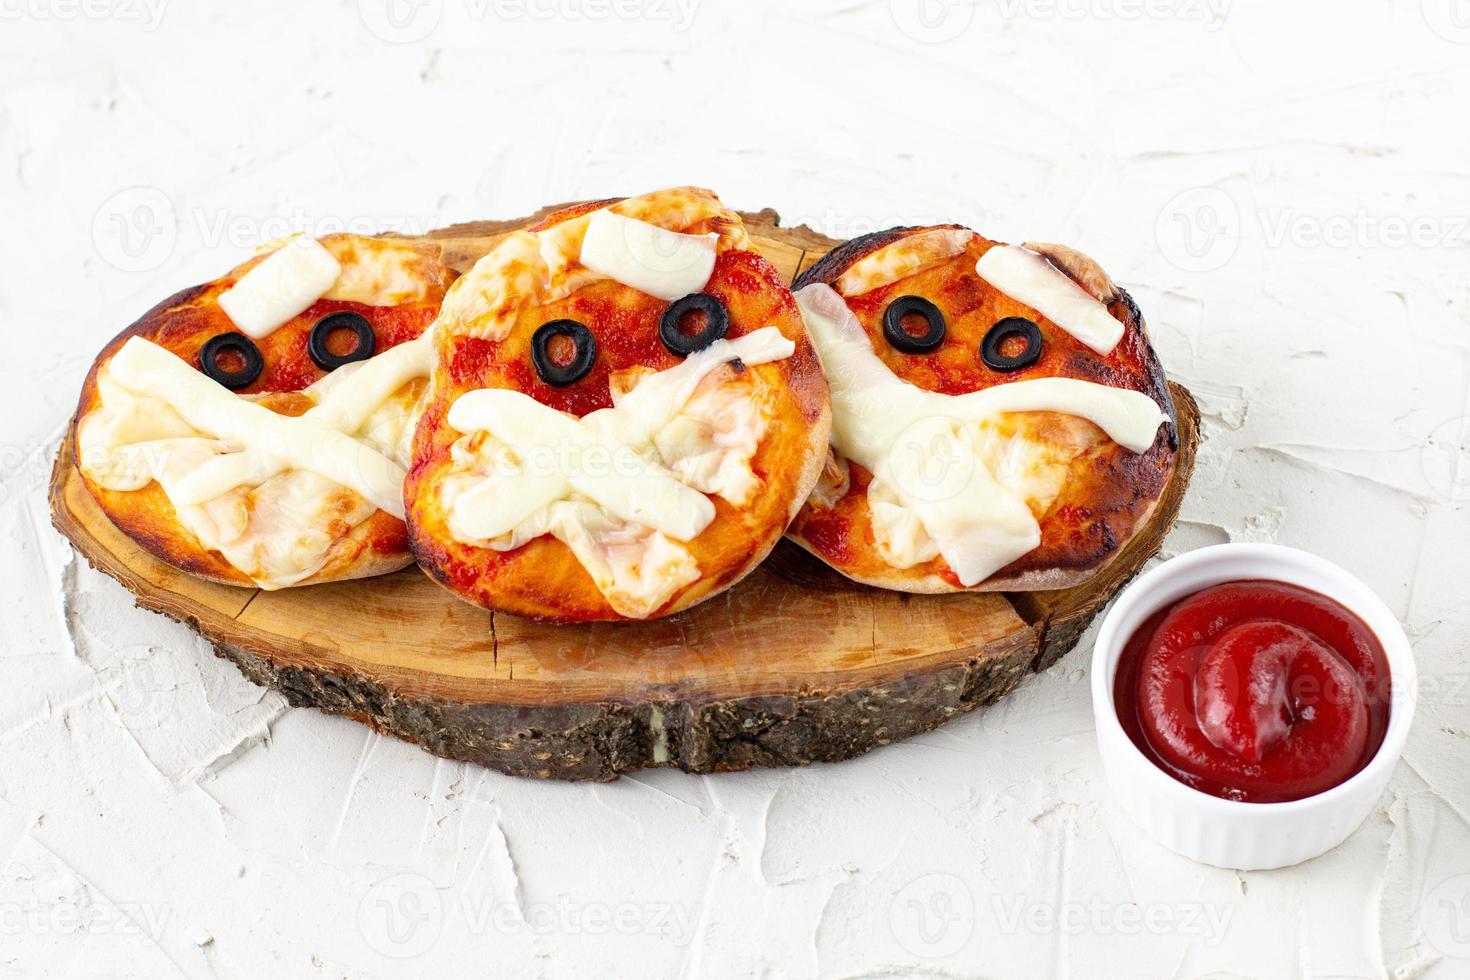 Mini pizza as mummy for kids with cheese, olives and ketchup. Funny crazy Halloween food for children photo